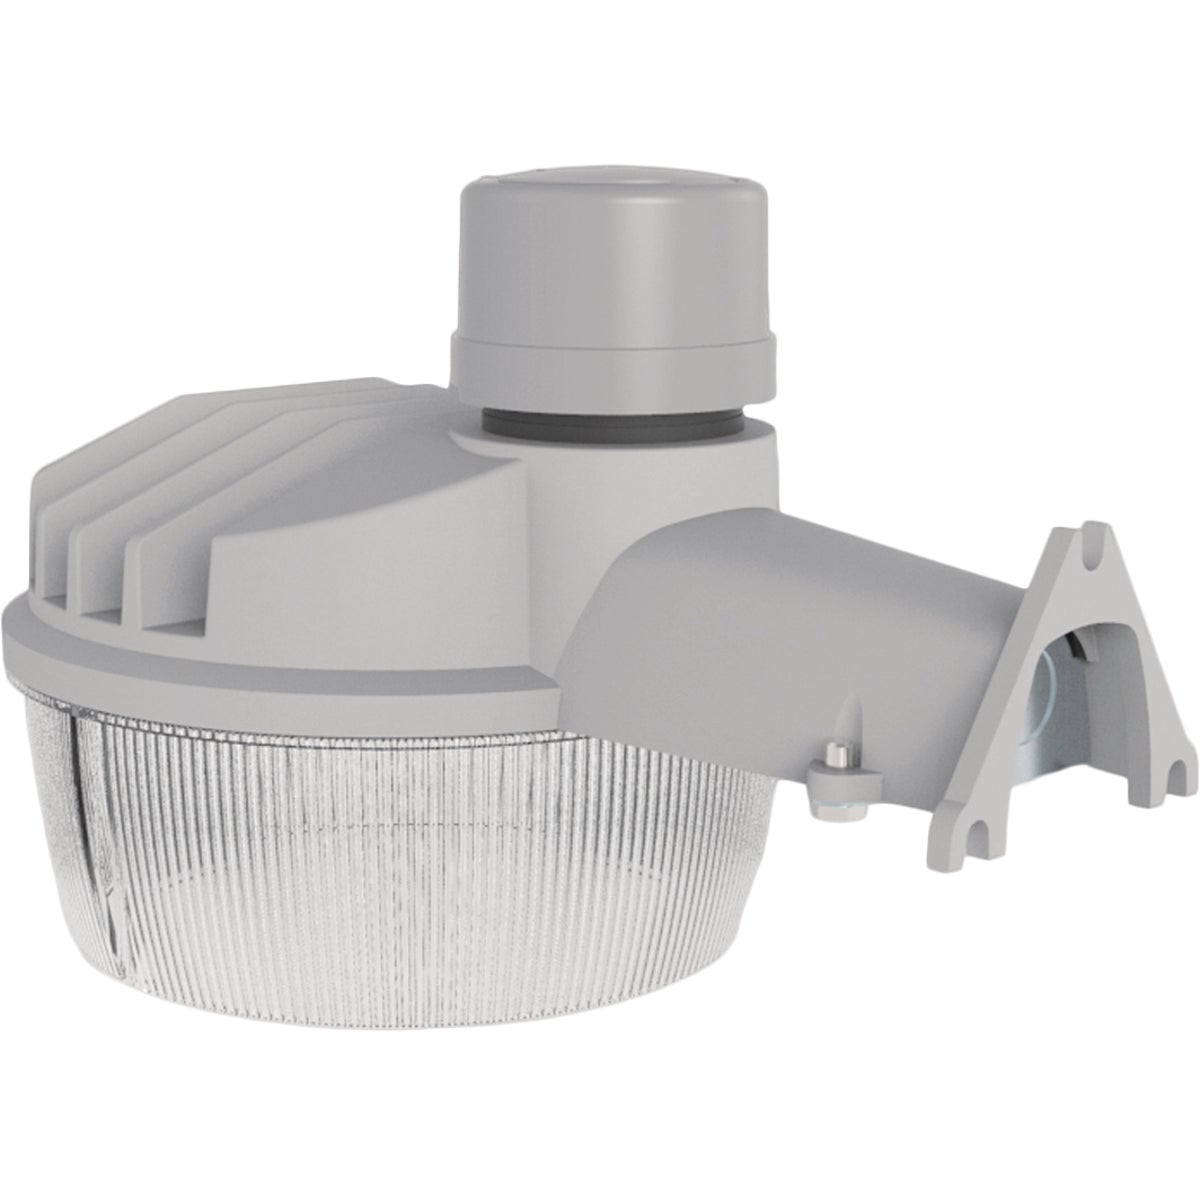 Halo Gray Dusk To Dawn LED Outdoor Area Light Fixture, 4000 Lm.